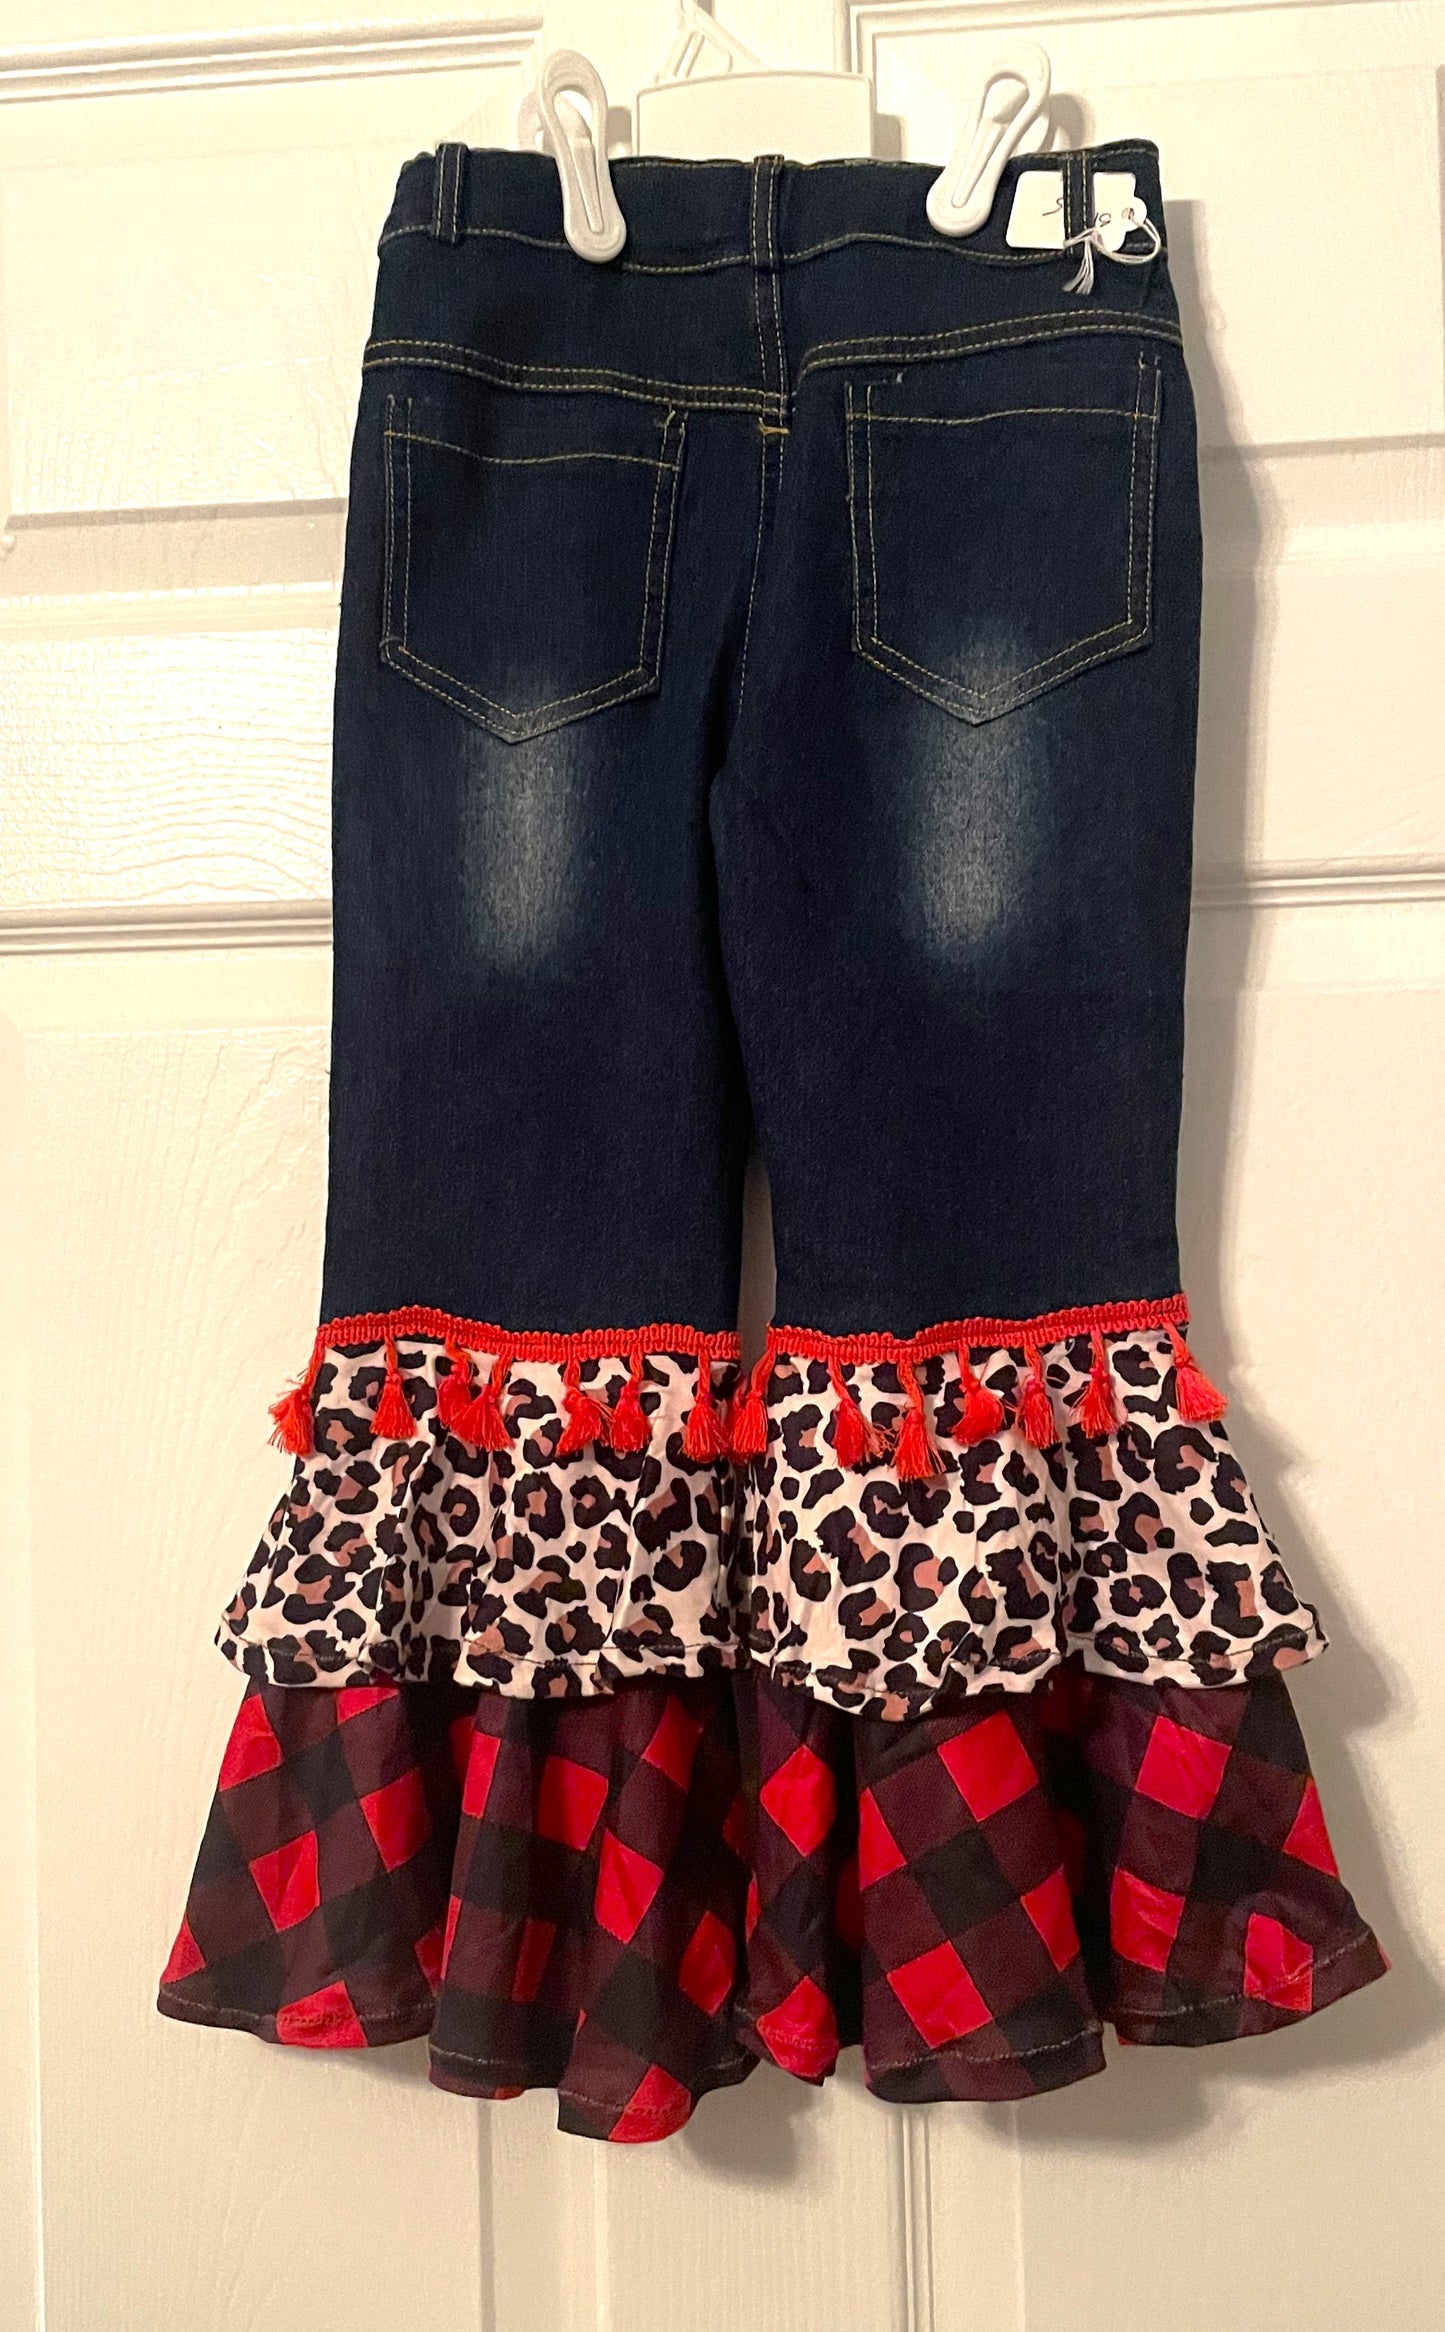 Buffalo Plaid Leopard Print Top with Denim Bell Bottom Jeans